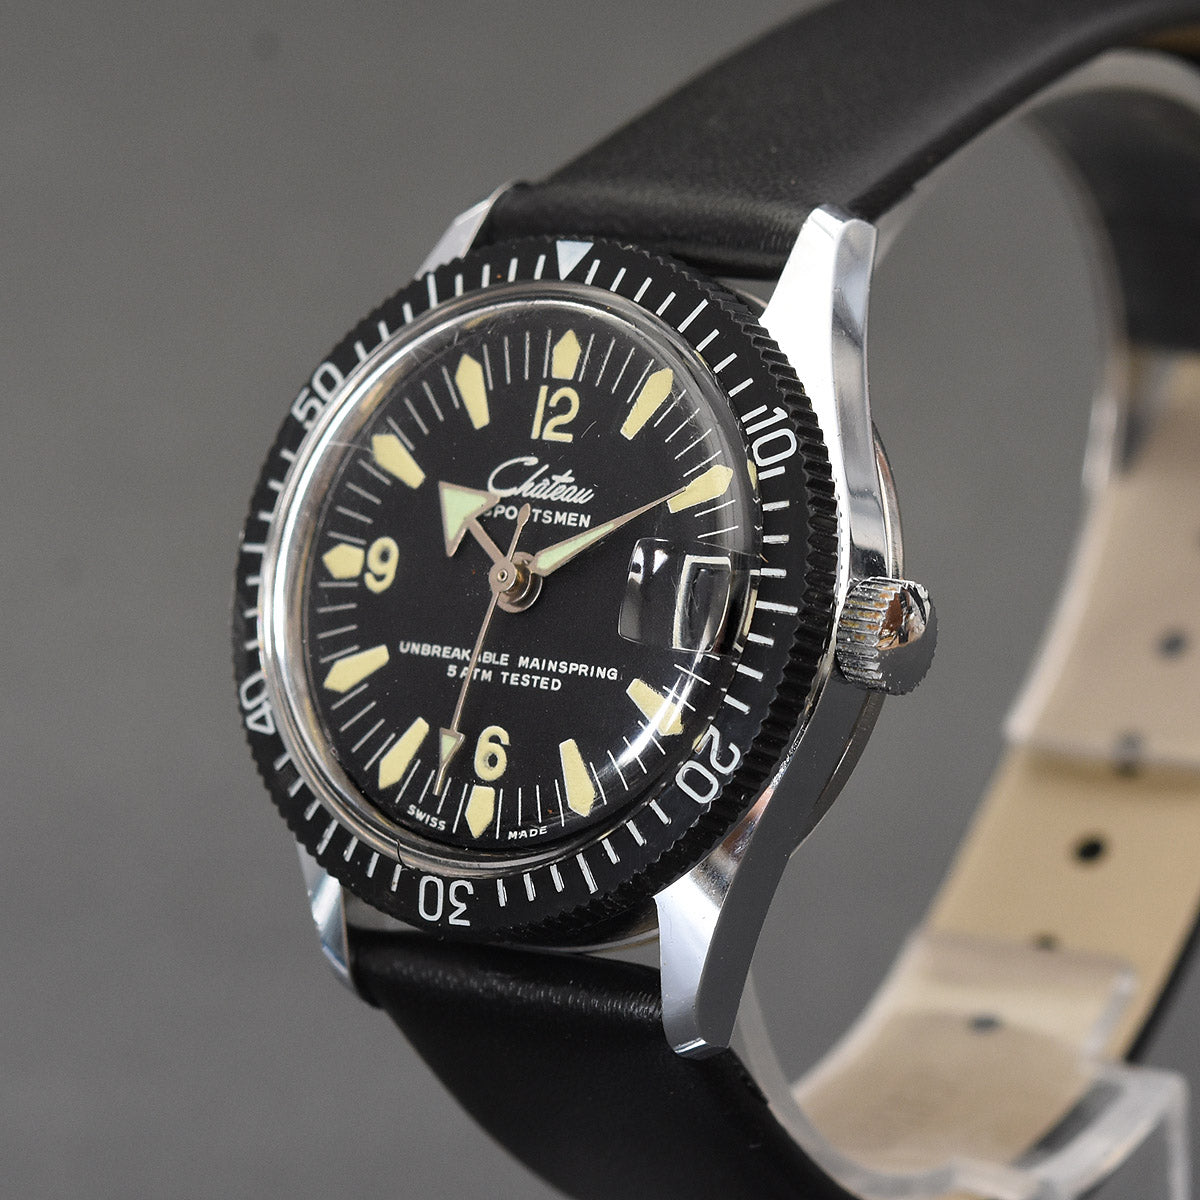 70s CHATEAU Sportsmen Date Vintage Diver Style Watch